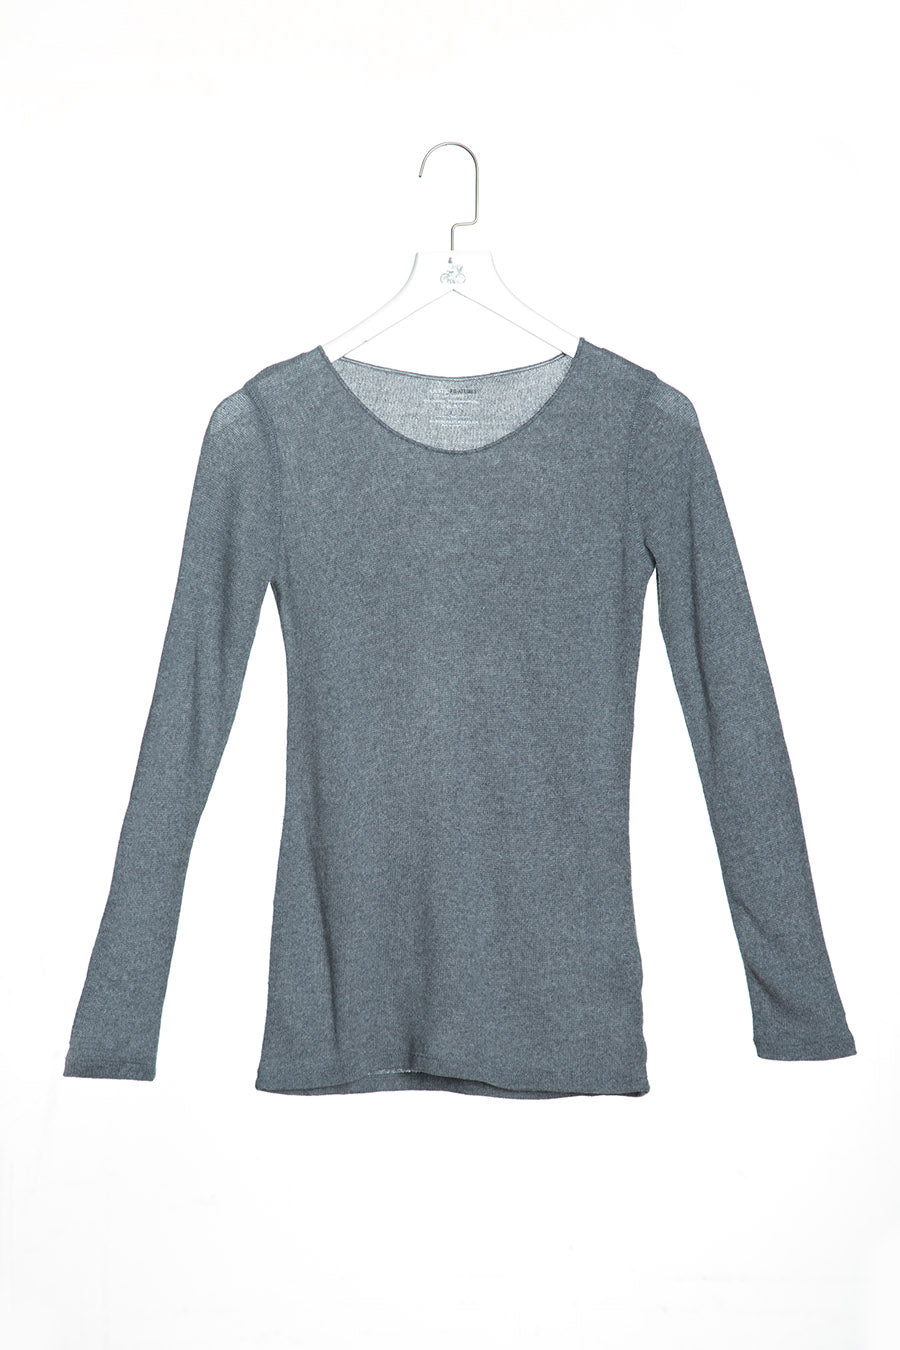 Sail Neck Long Sleeves Cashmere T-Shirt